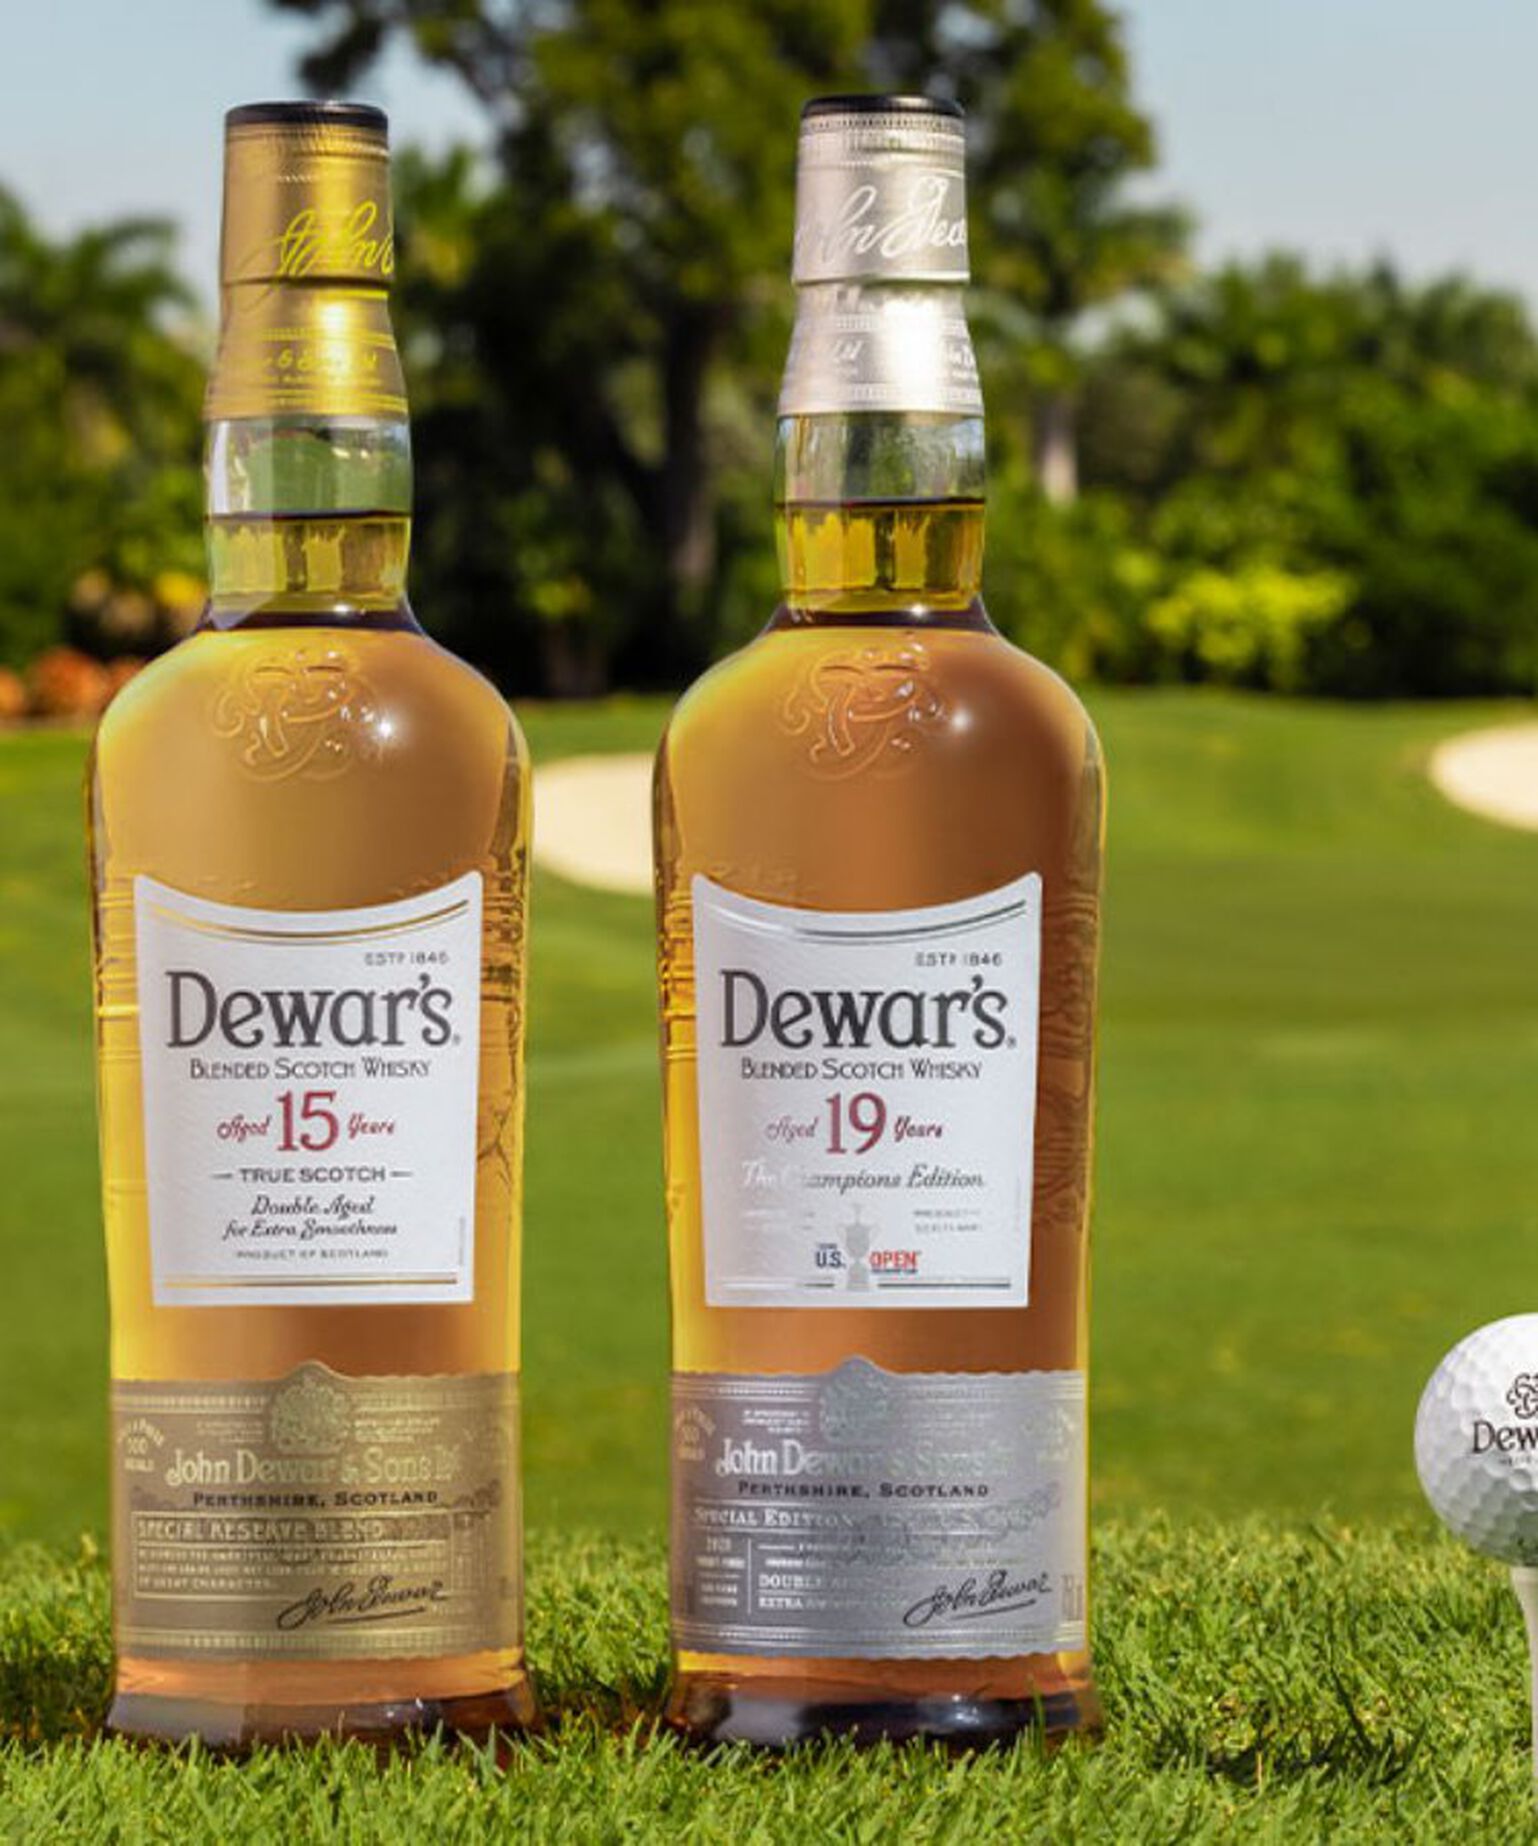 Dewar's Aged 15 Years and Aged 19 Years bottles beside a golf ball on a tee on golf course turf